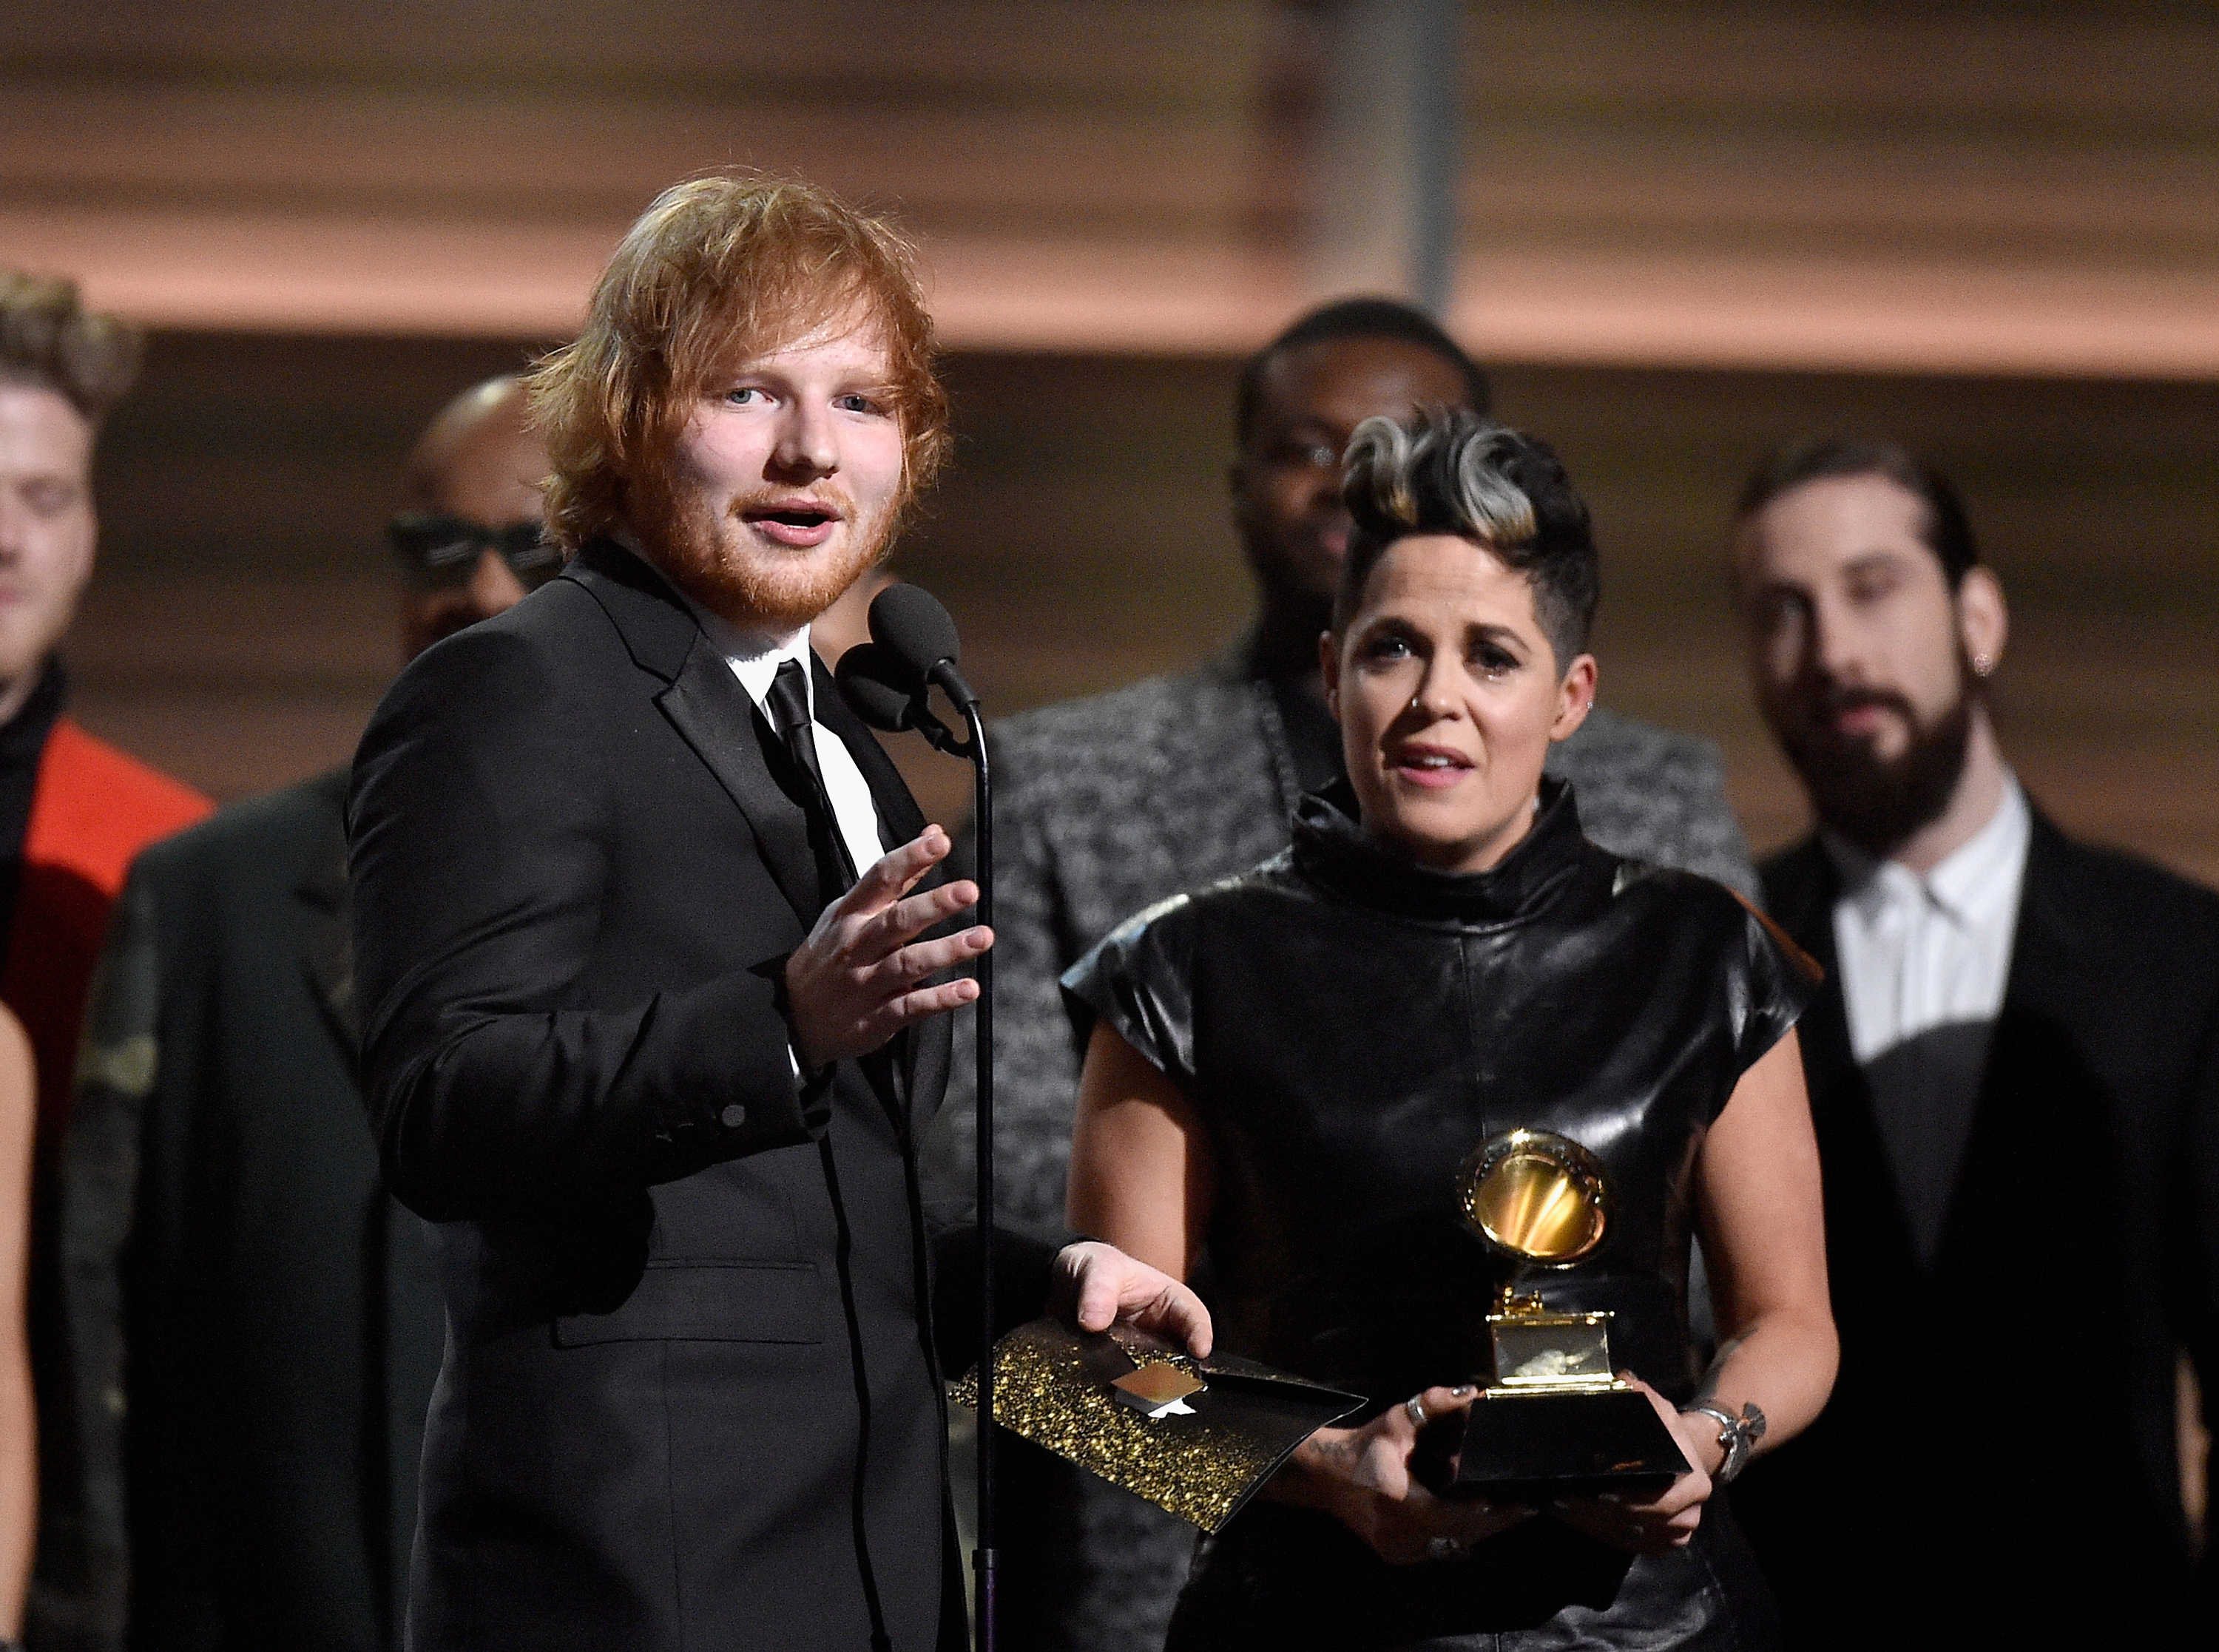 Ed Sheeran (L) and Amy Wadge accept award for Best Pop Solo Performance for 'Thinking Out Loud' onstage during The 58th Grammy Awards at Staples Center on February 15, 2016 in Los Angeles, California. 